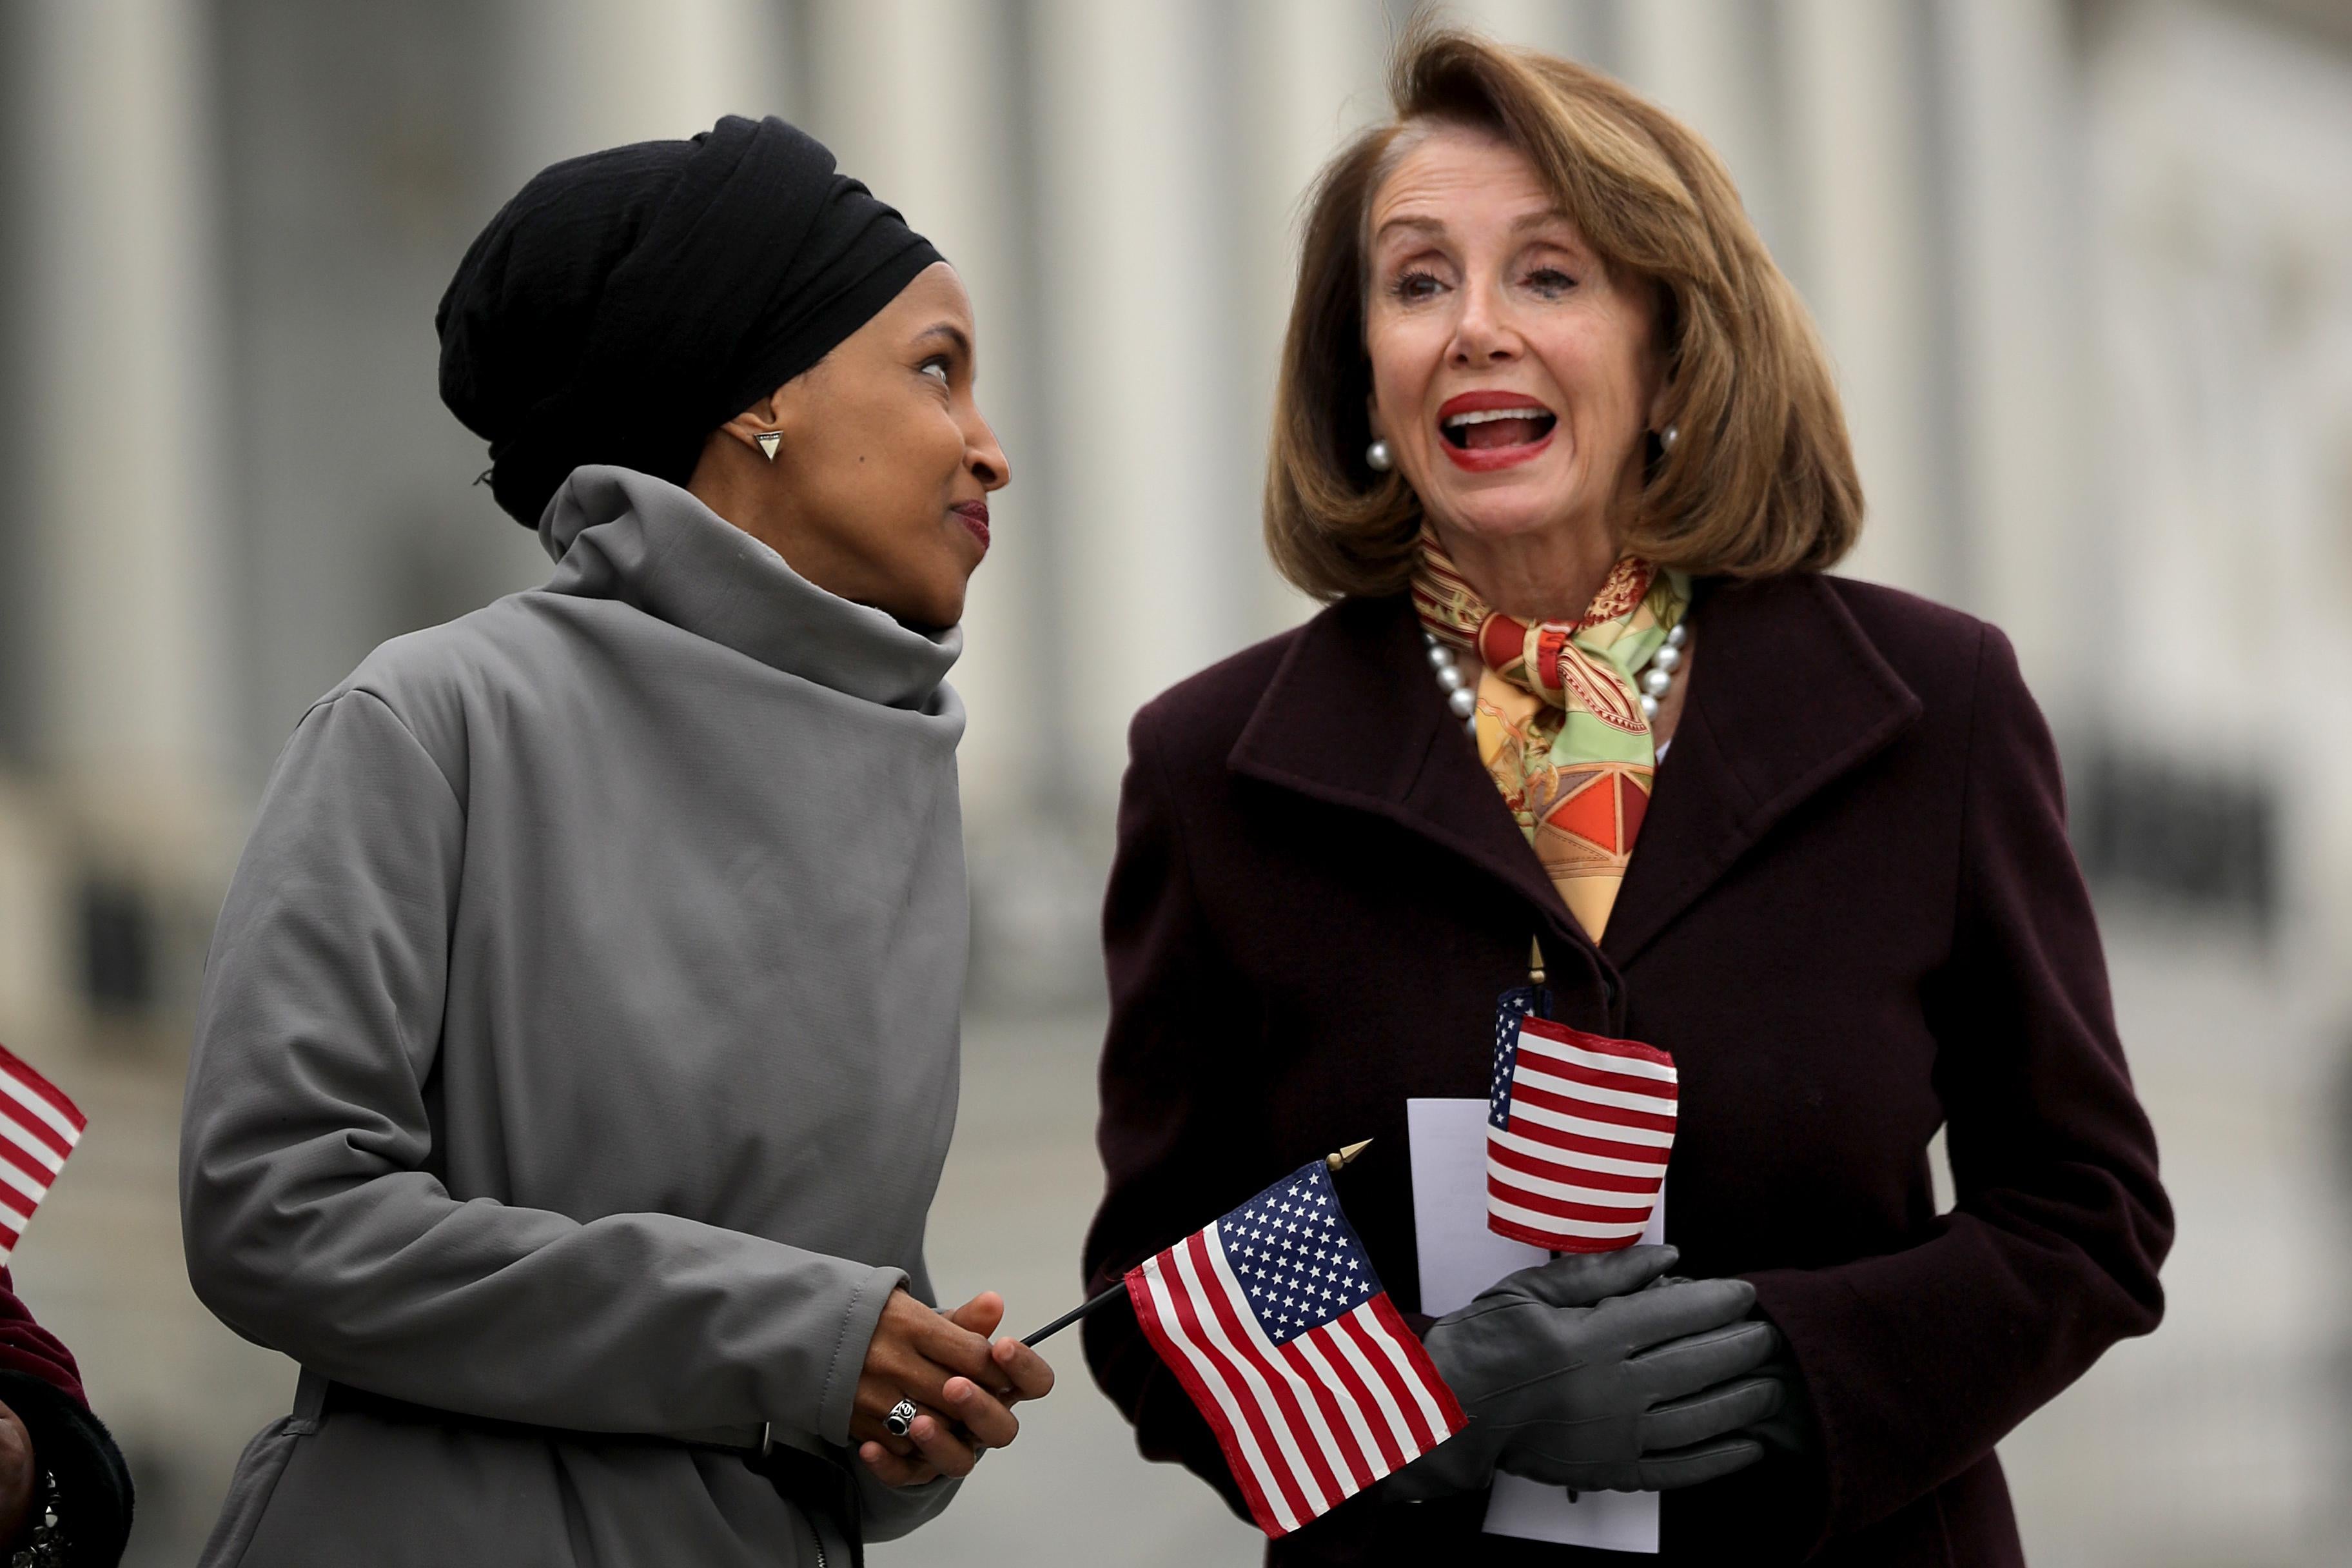 Rep. Ilhan Omar talks with Speaker of the House Nancy Pelosi during a rally on the East Steps of the U.S. Capitol on March 8, 2019 in Washington, D.C.